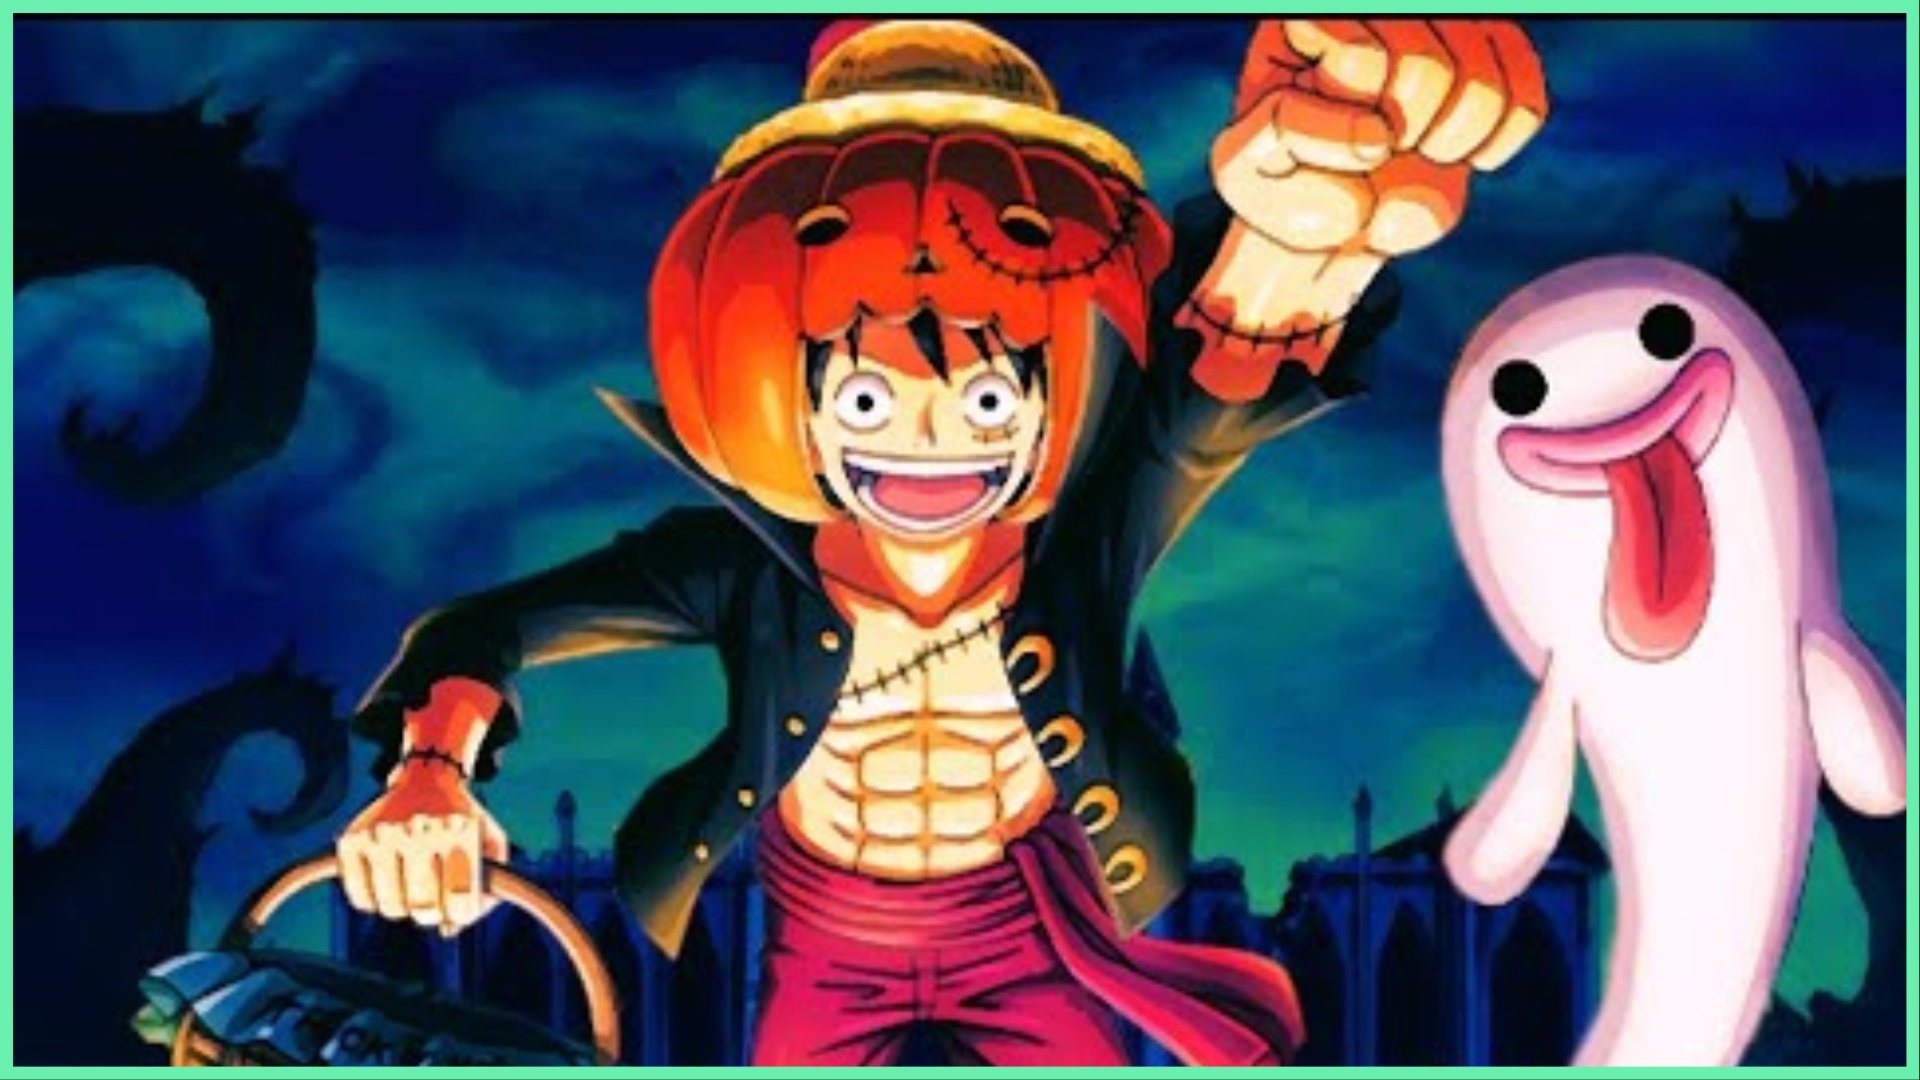 the image shows a halloween luffy extending a fist to the viewer with a pumpkin on his head. To the right of him is a cheeky white ghost with his tongue sticking out